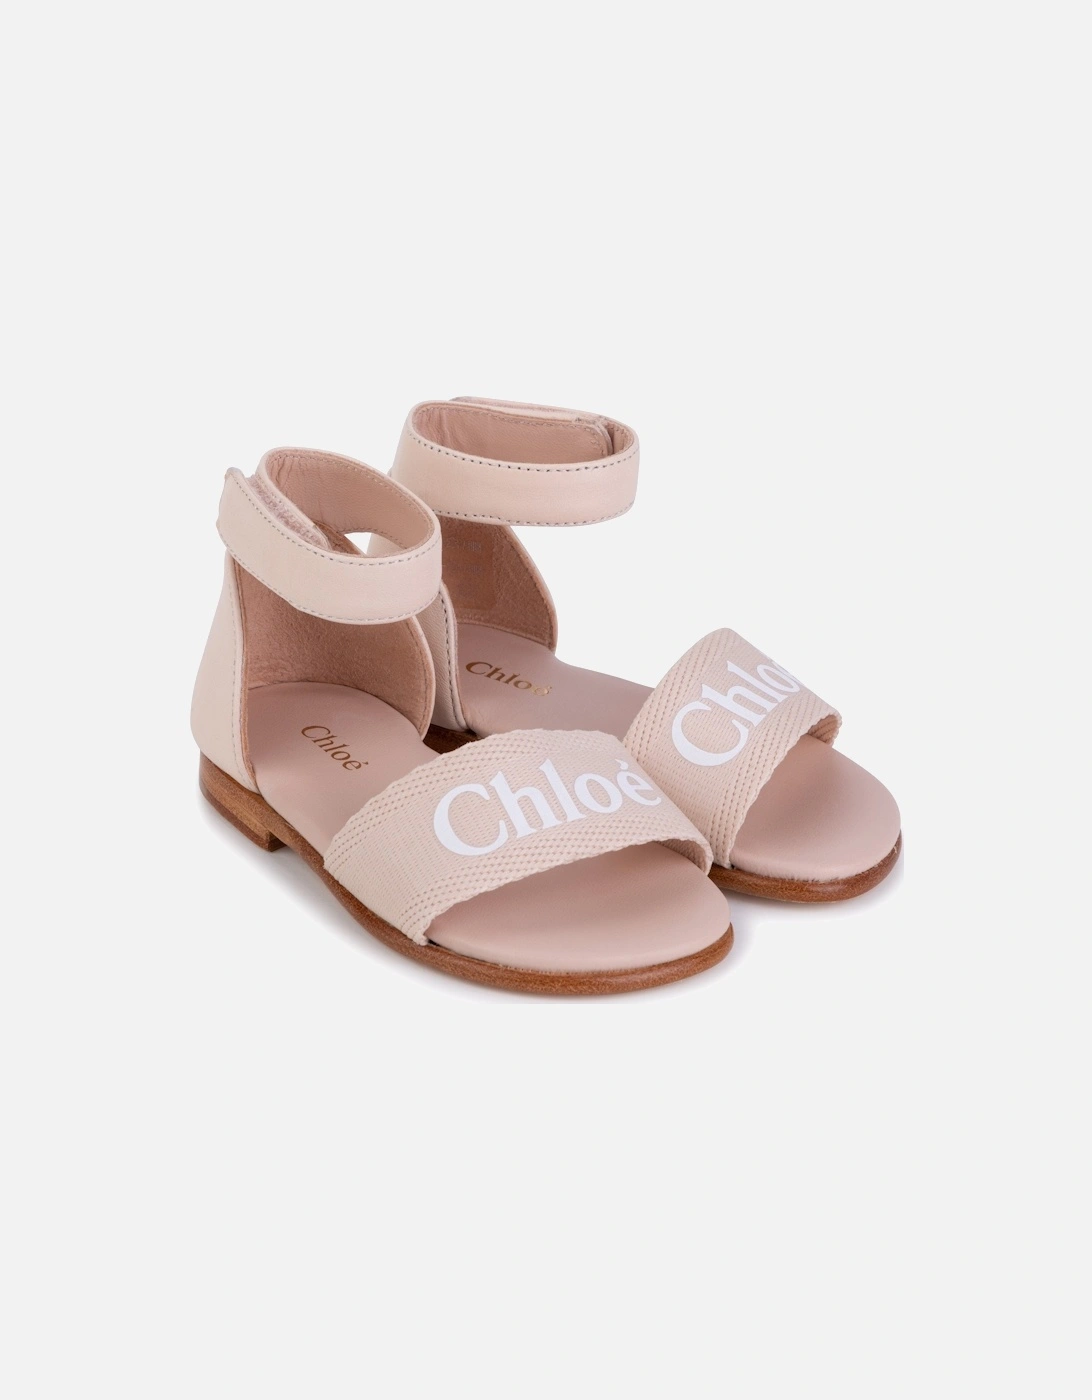 Girls Pink Sandals, 7 of 6